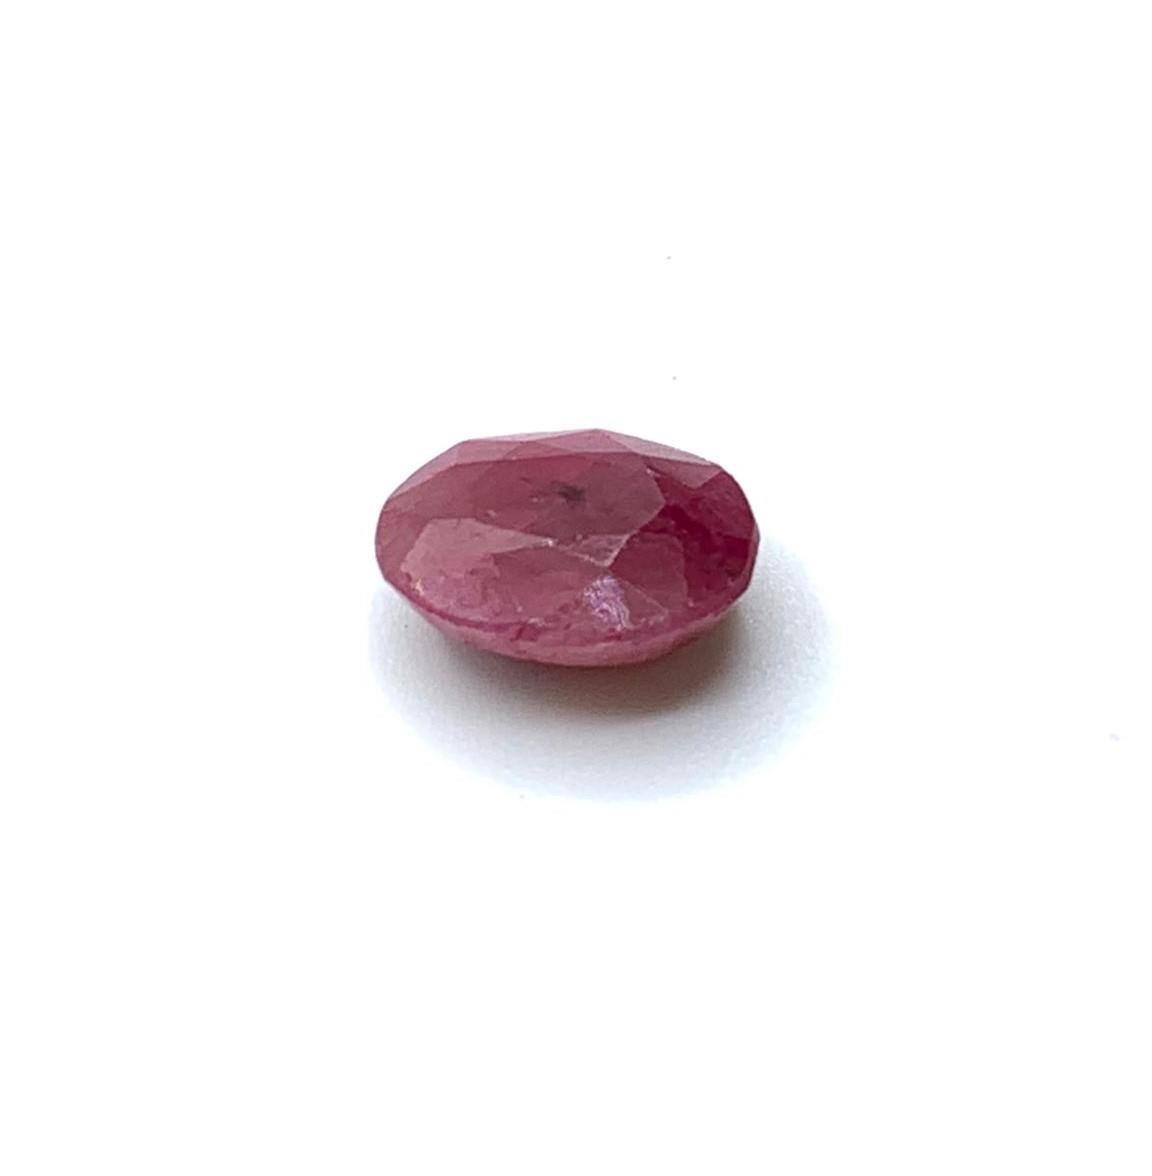 5.22 Cts Natural Ruby. IDT Certified